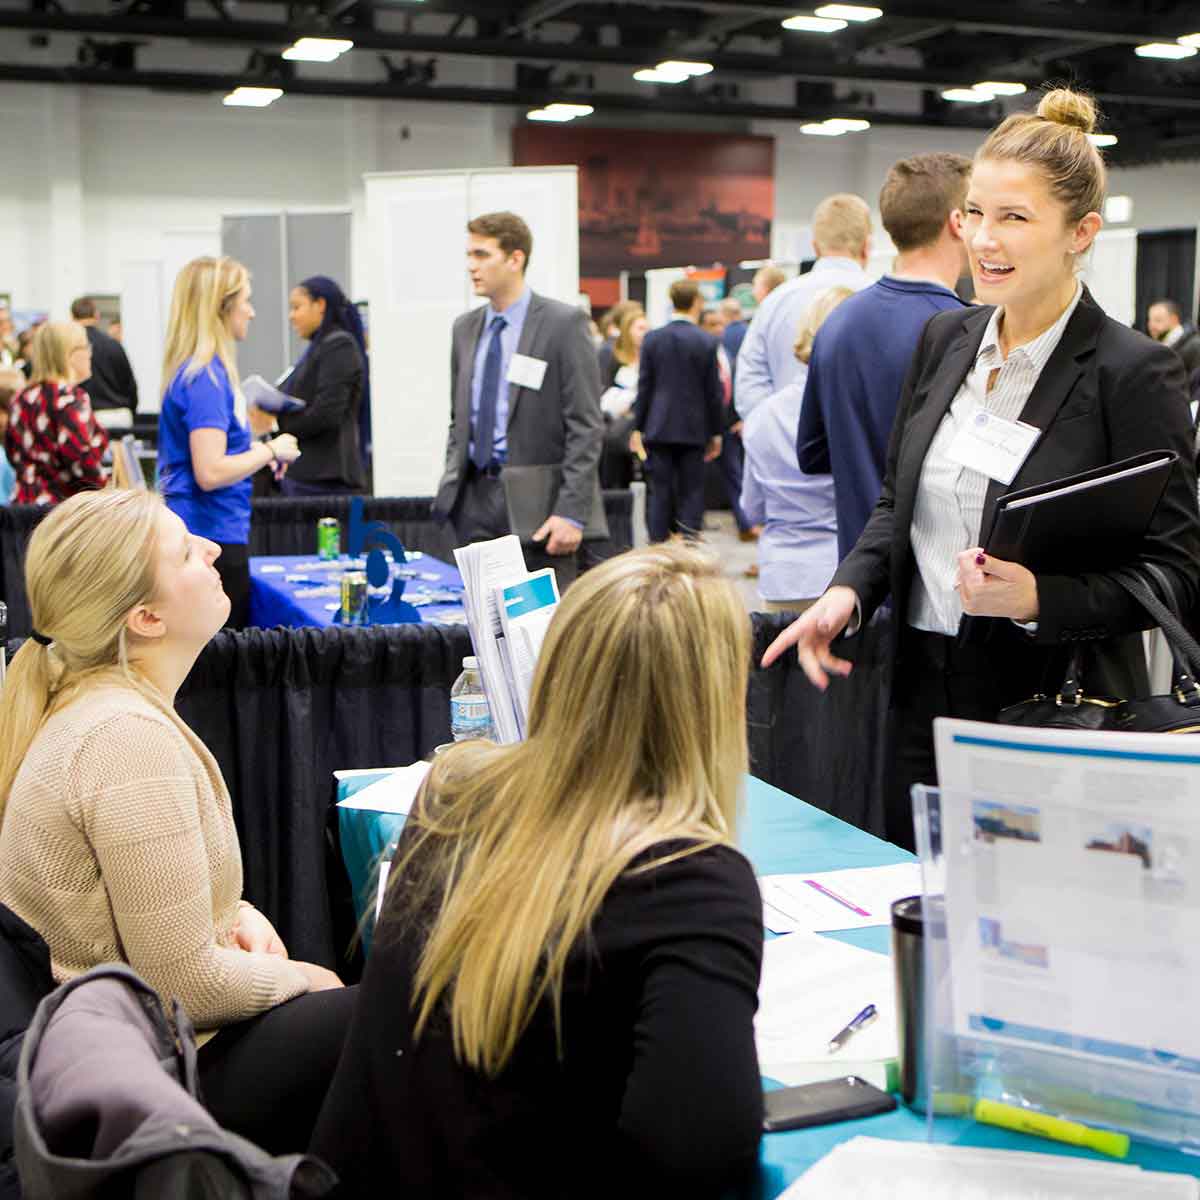 Students and recruiters at a job fair.